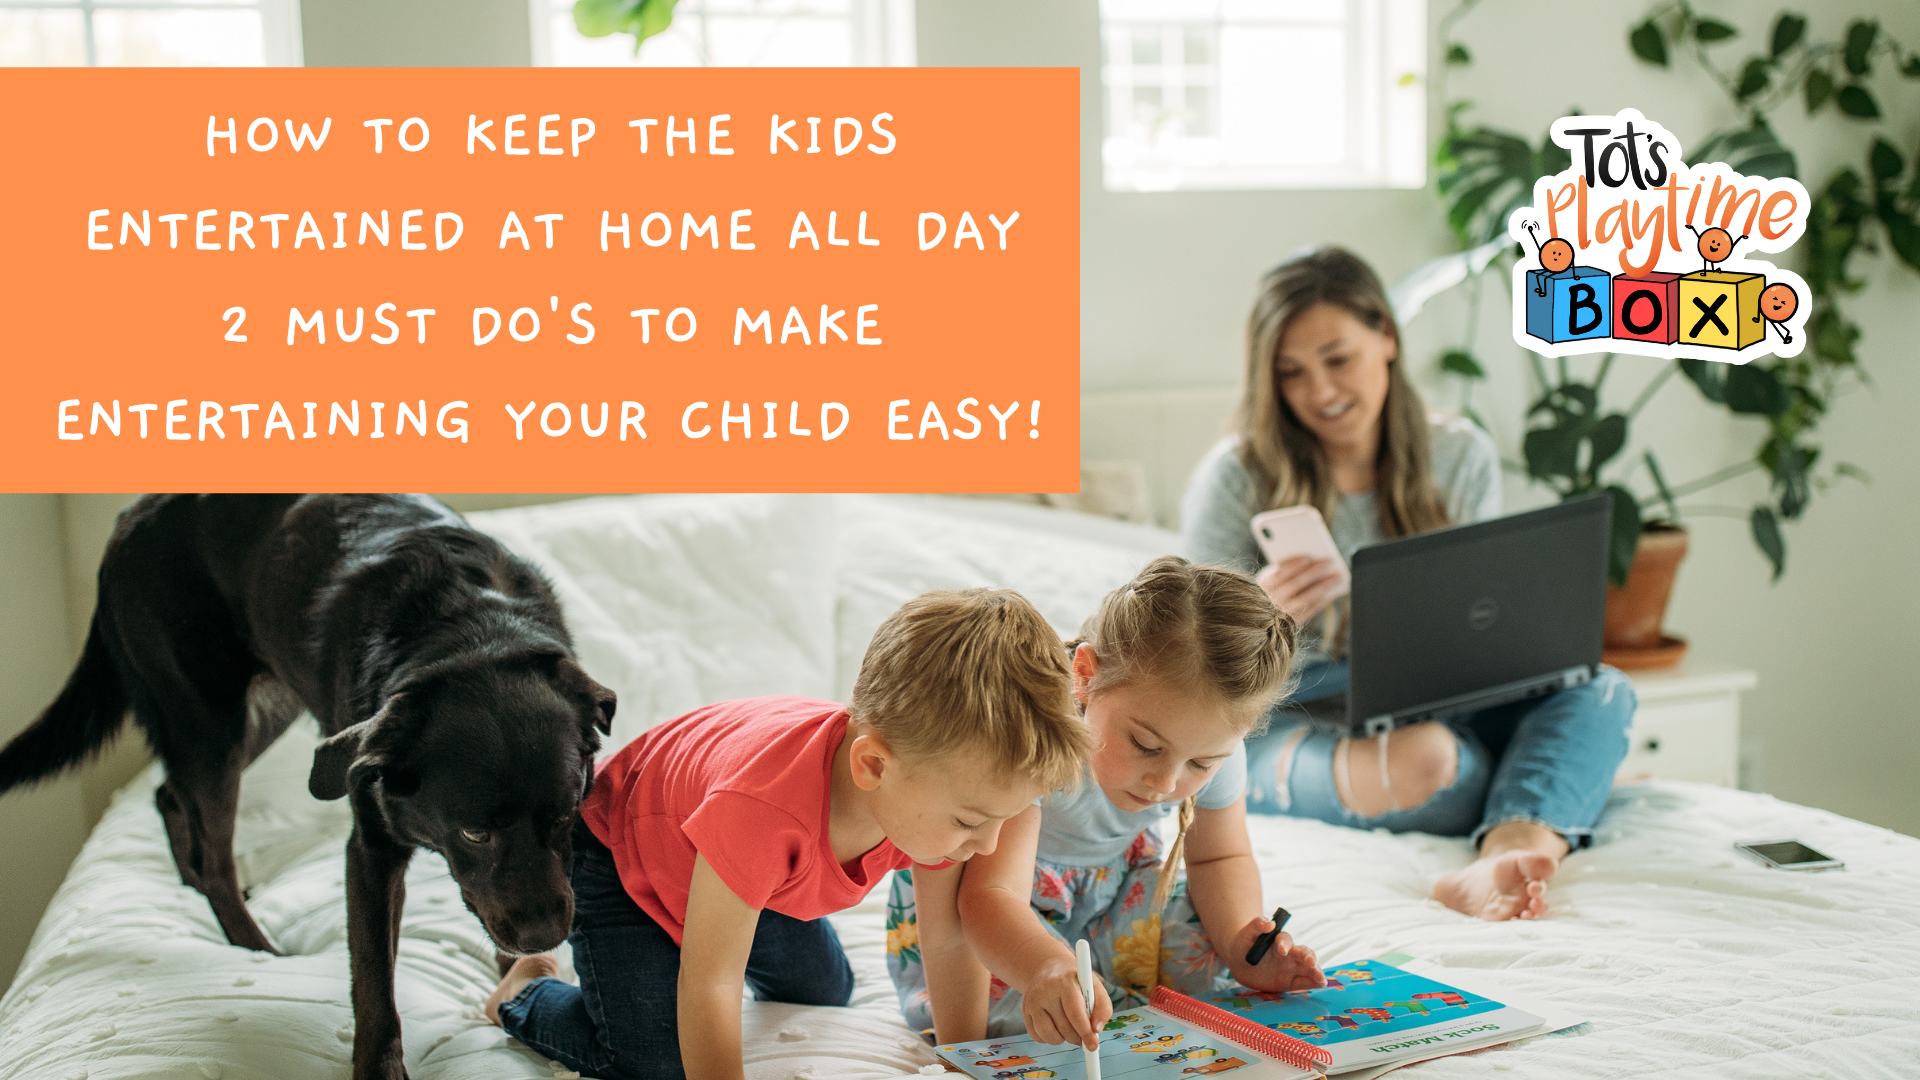 How to keep the kids entertained at home all day